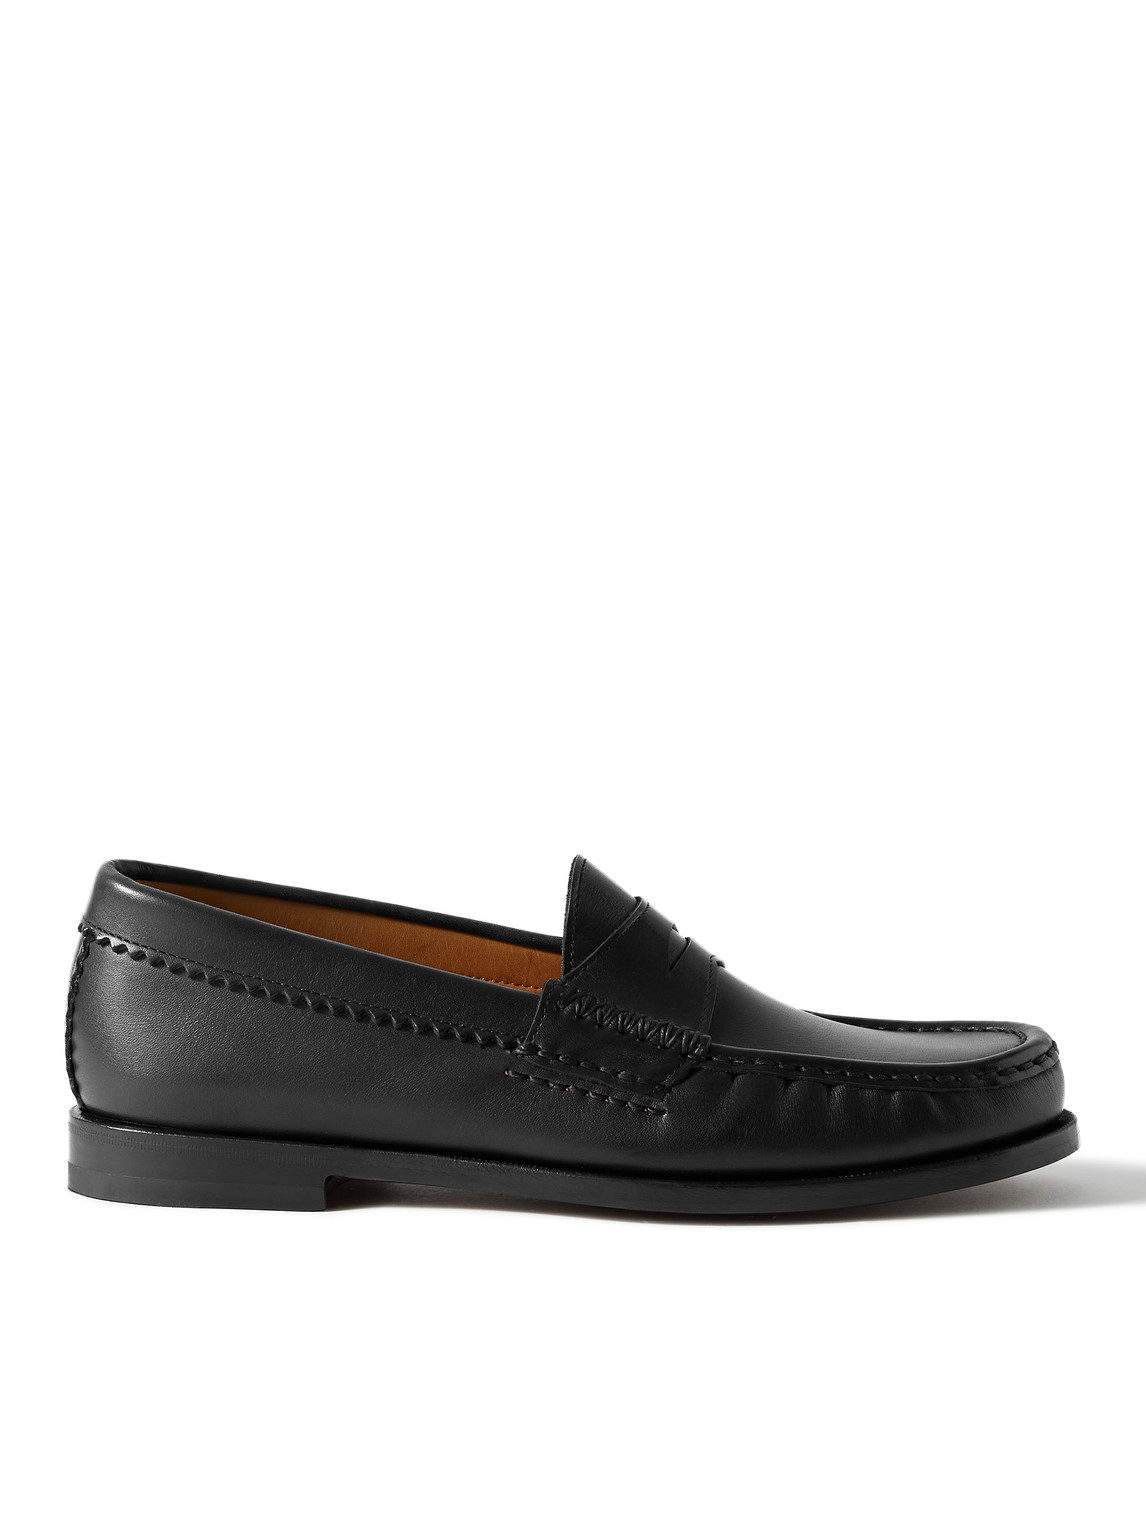 Rob's Leather Penny Loafers